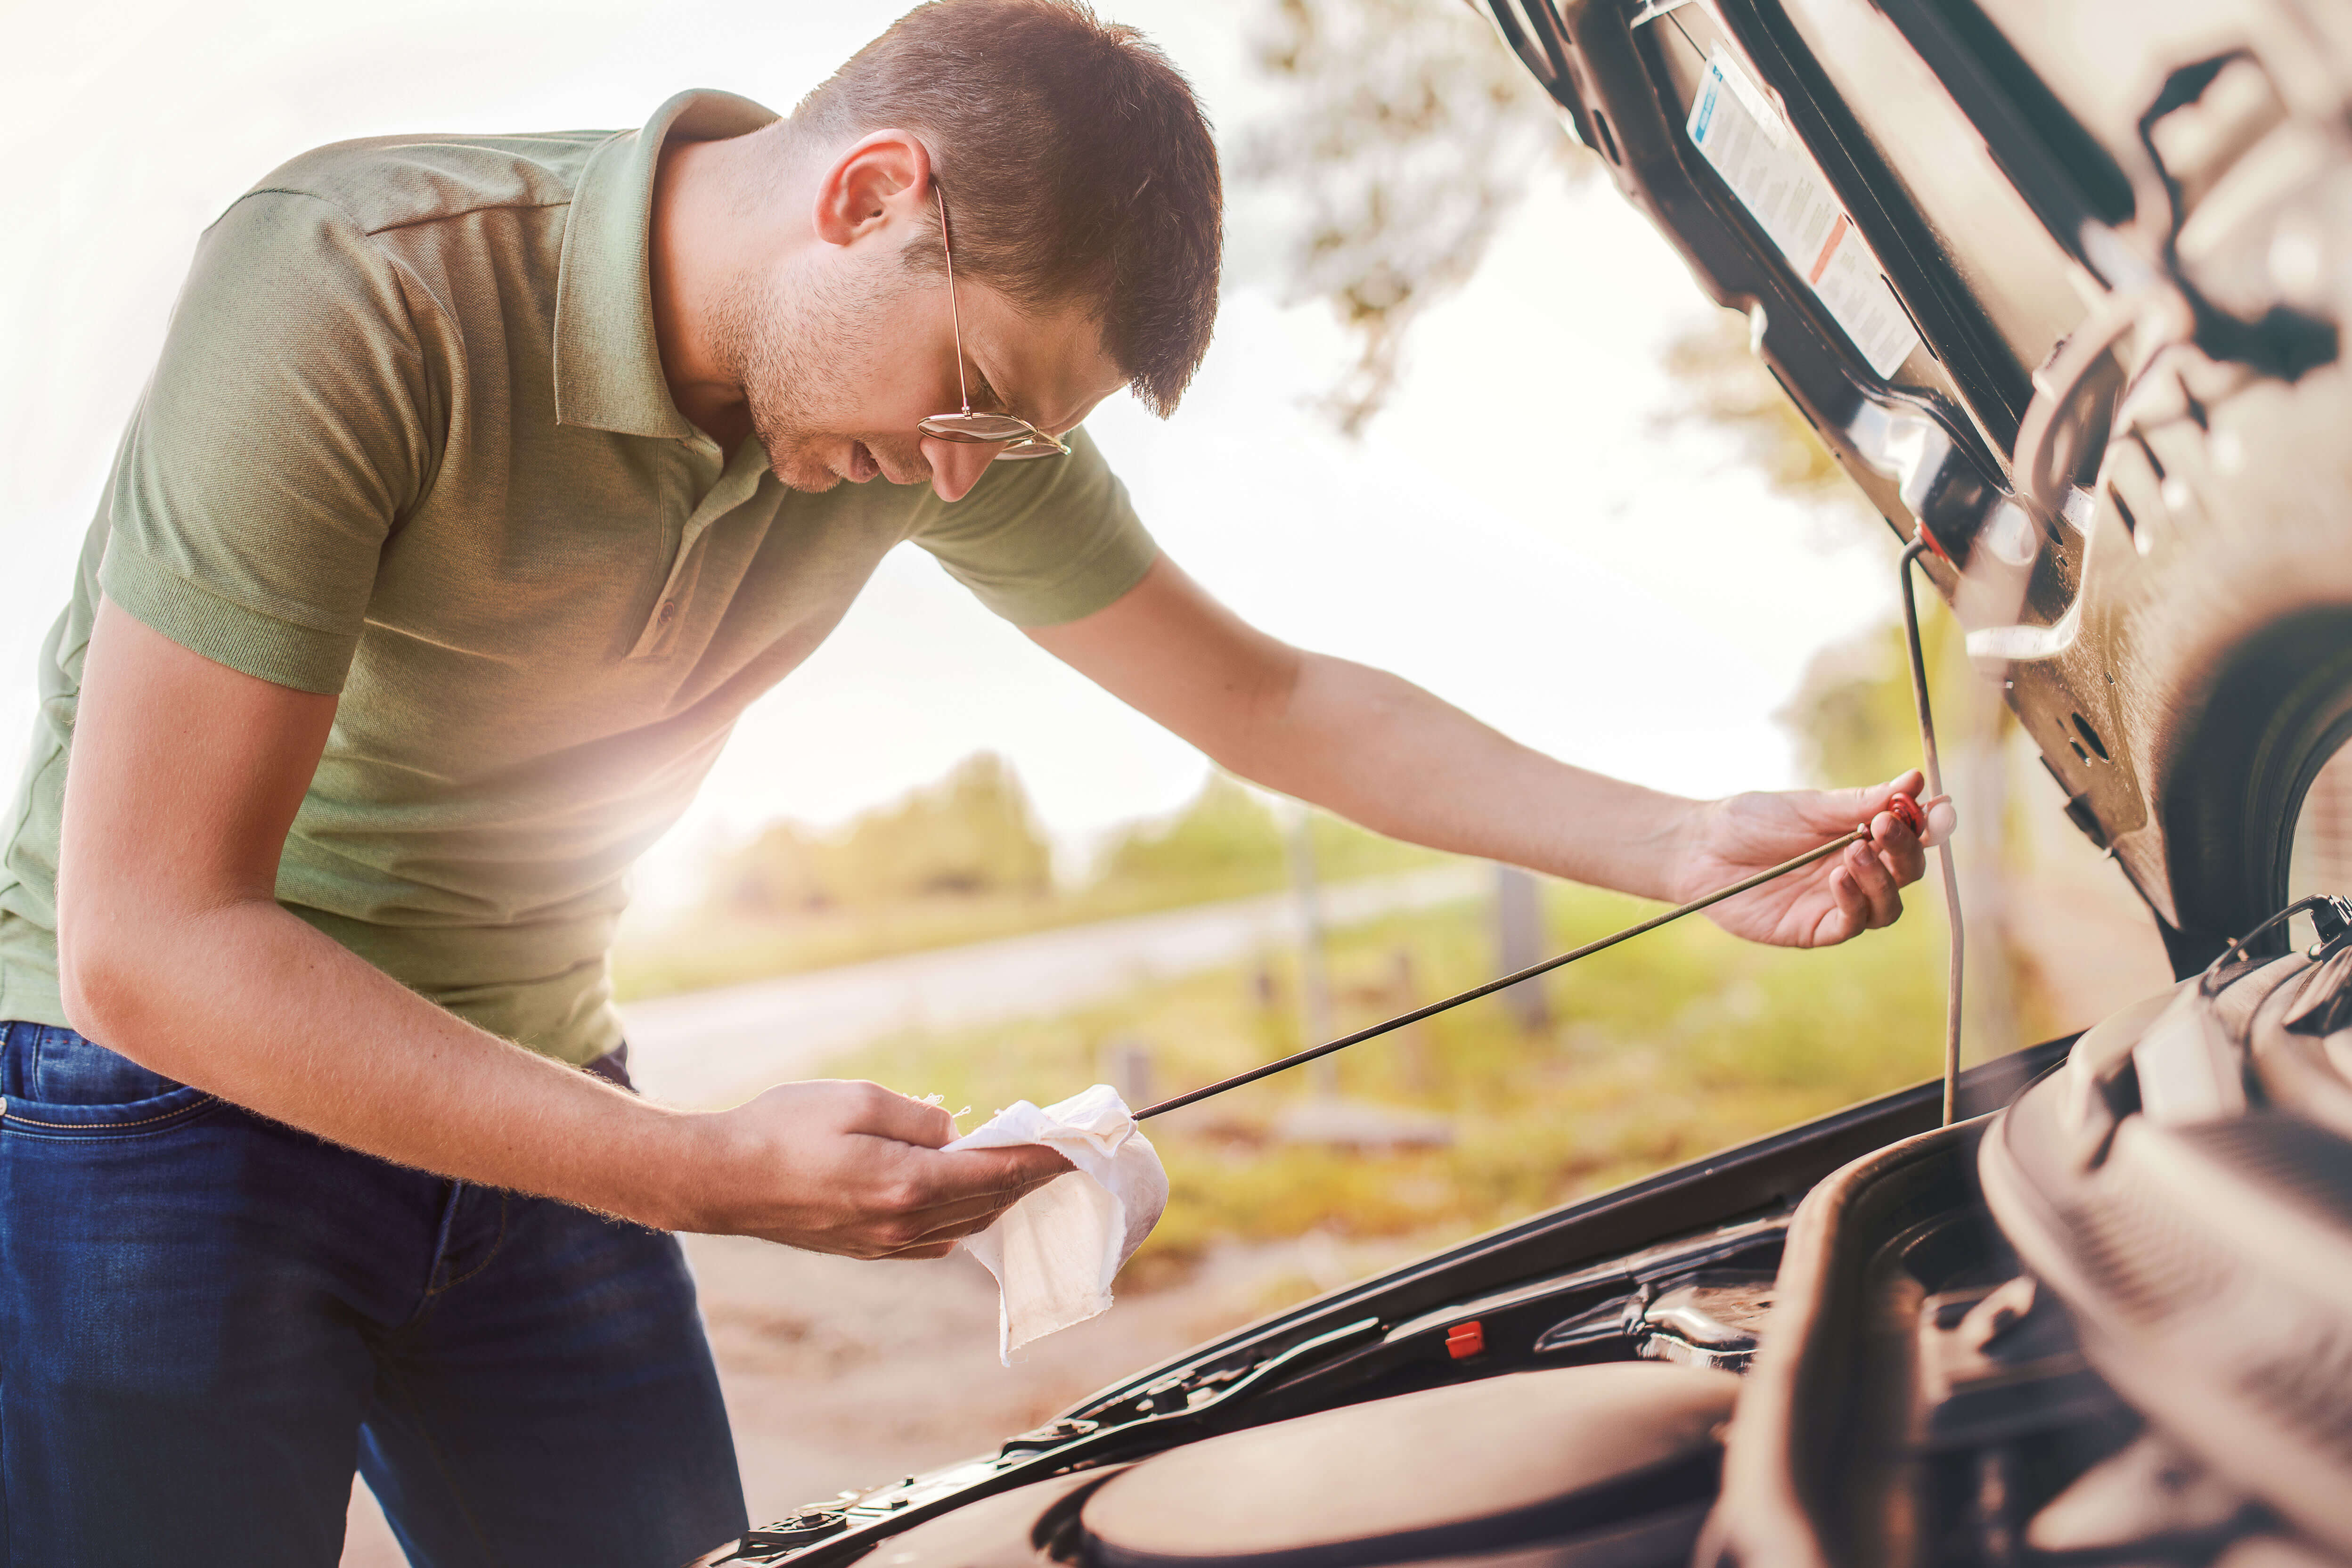 Tecnic Driving Schools give you five tips on how to properly maintain a vehicle.